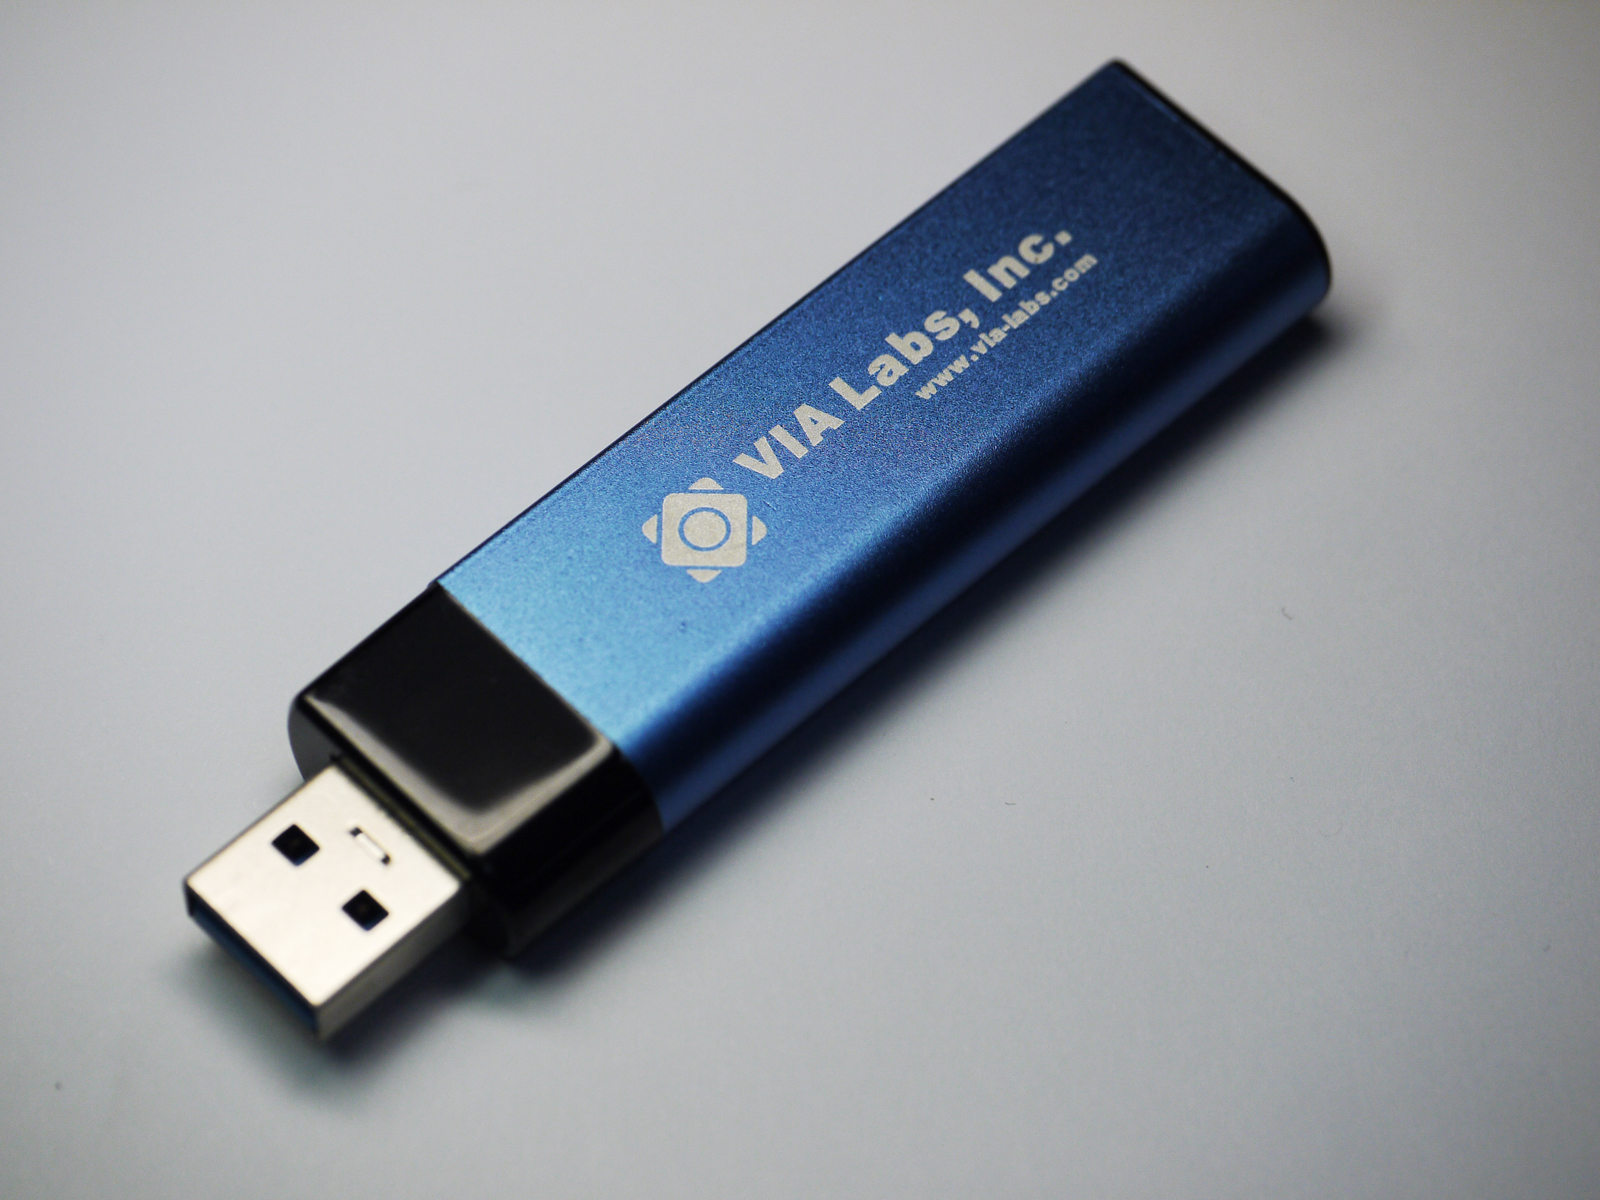 a blue and black usb device with the words wild tech written on it